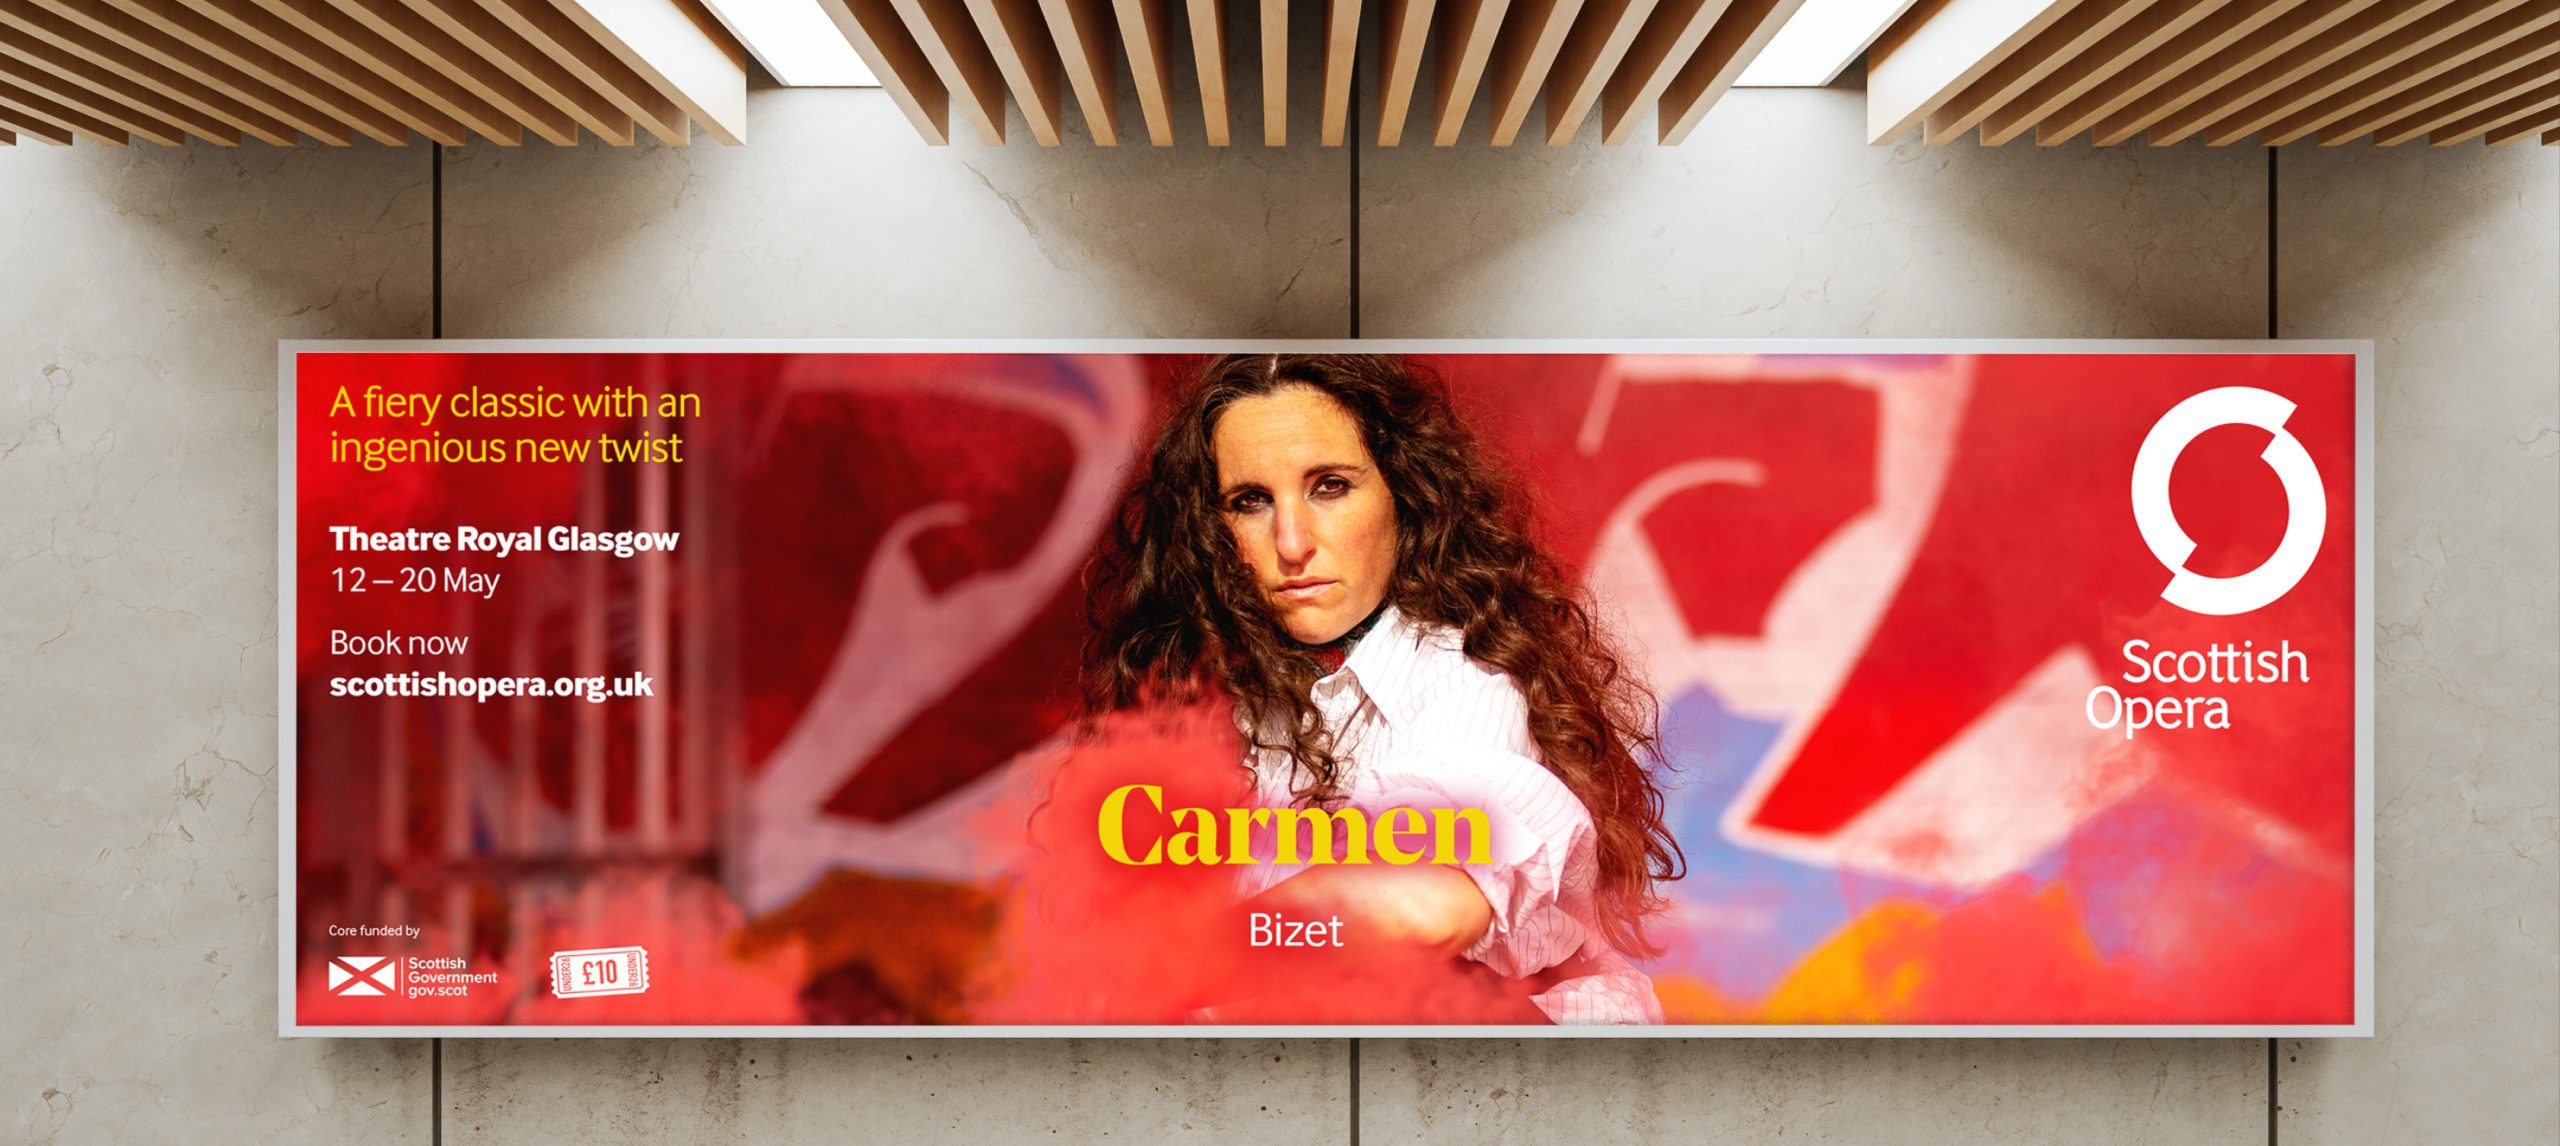 Campaign artwork for an opera called 'Carmen' installed in an outdoor advertising space.